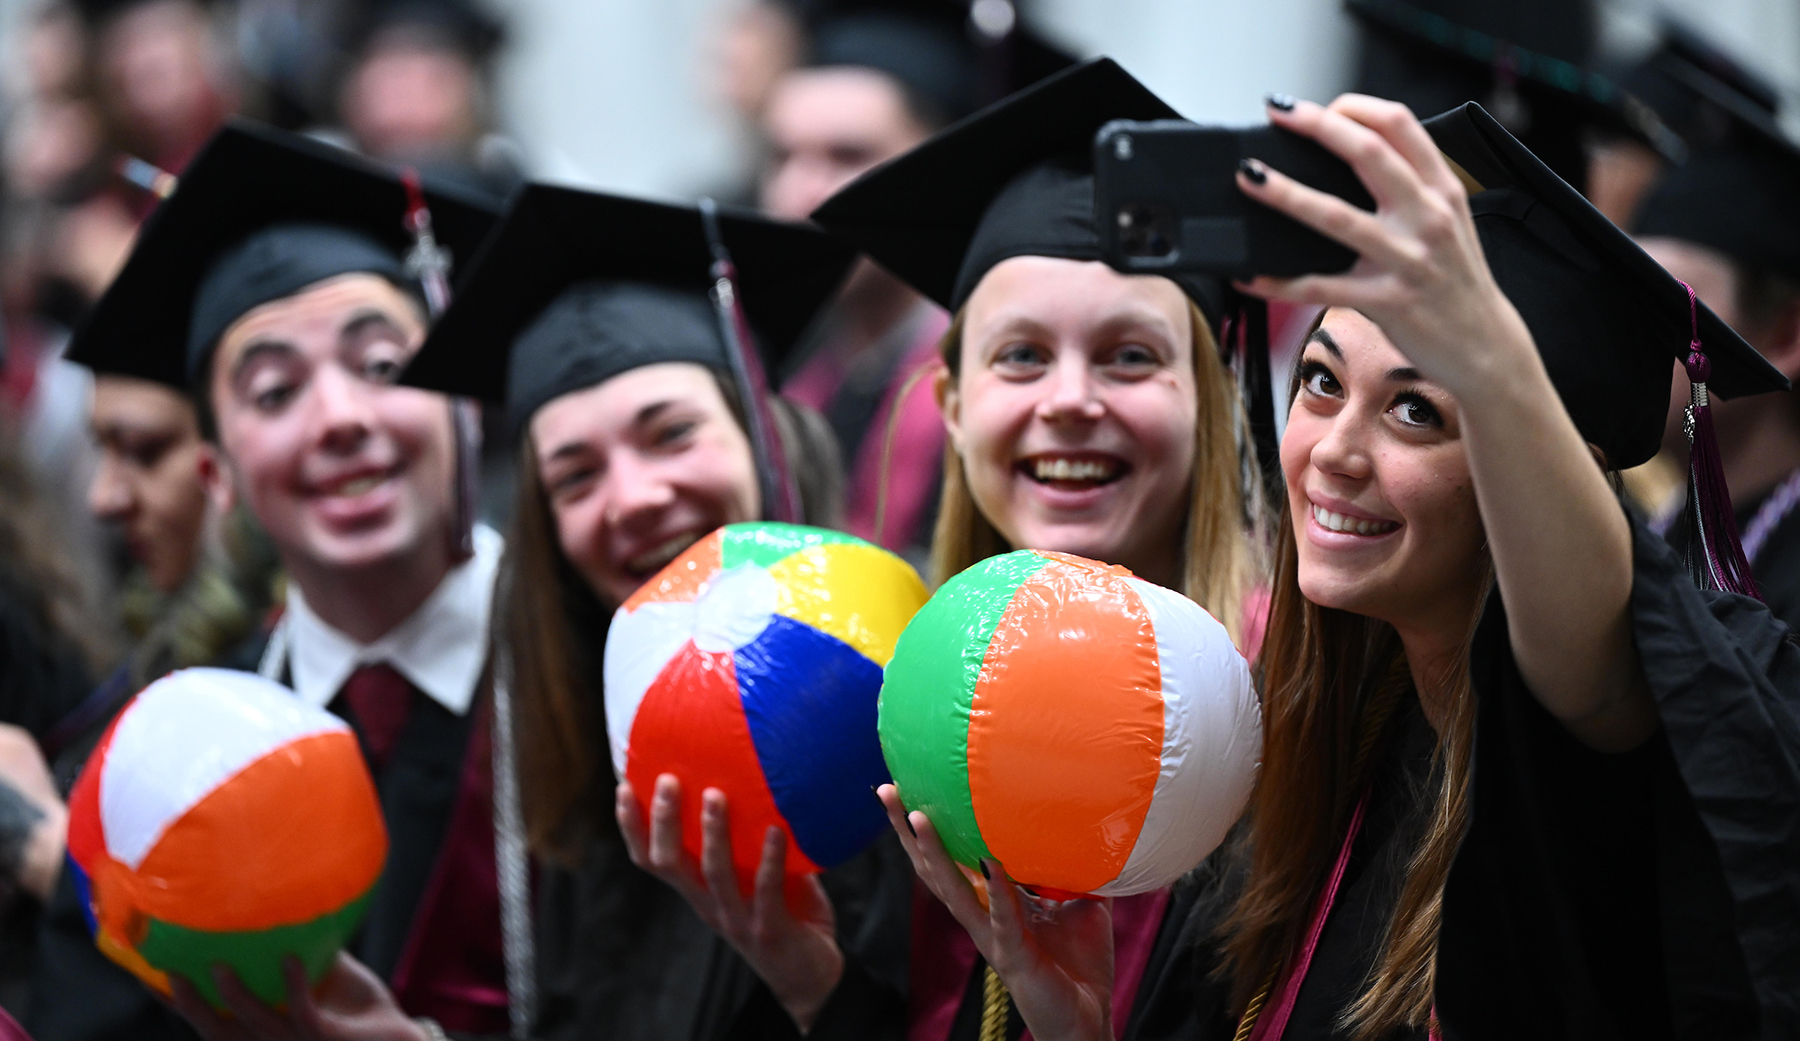 Students at Commencement smile while holding beach balls as the student on the right snaps a selfie of the group